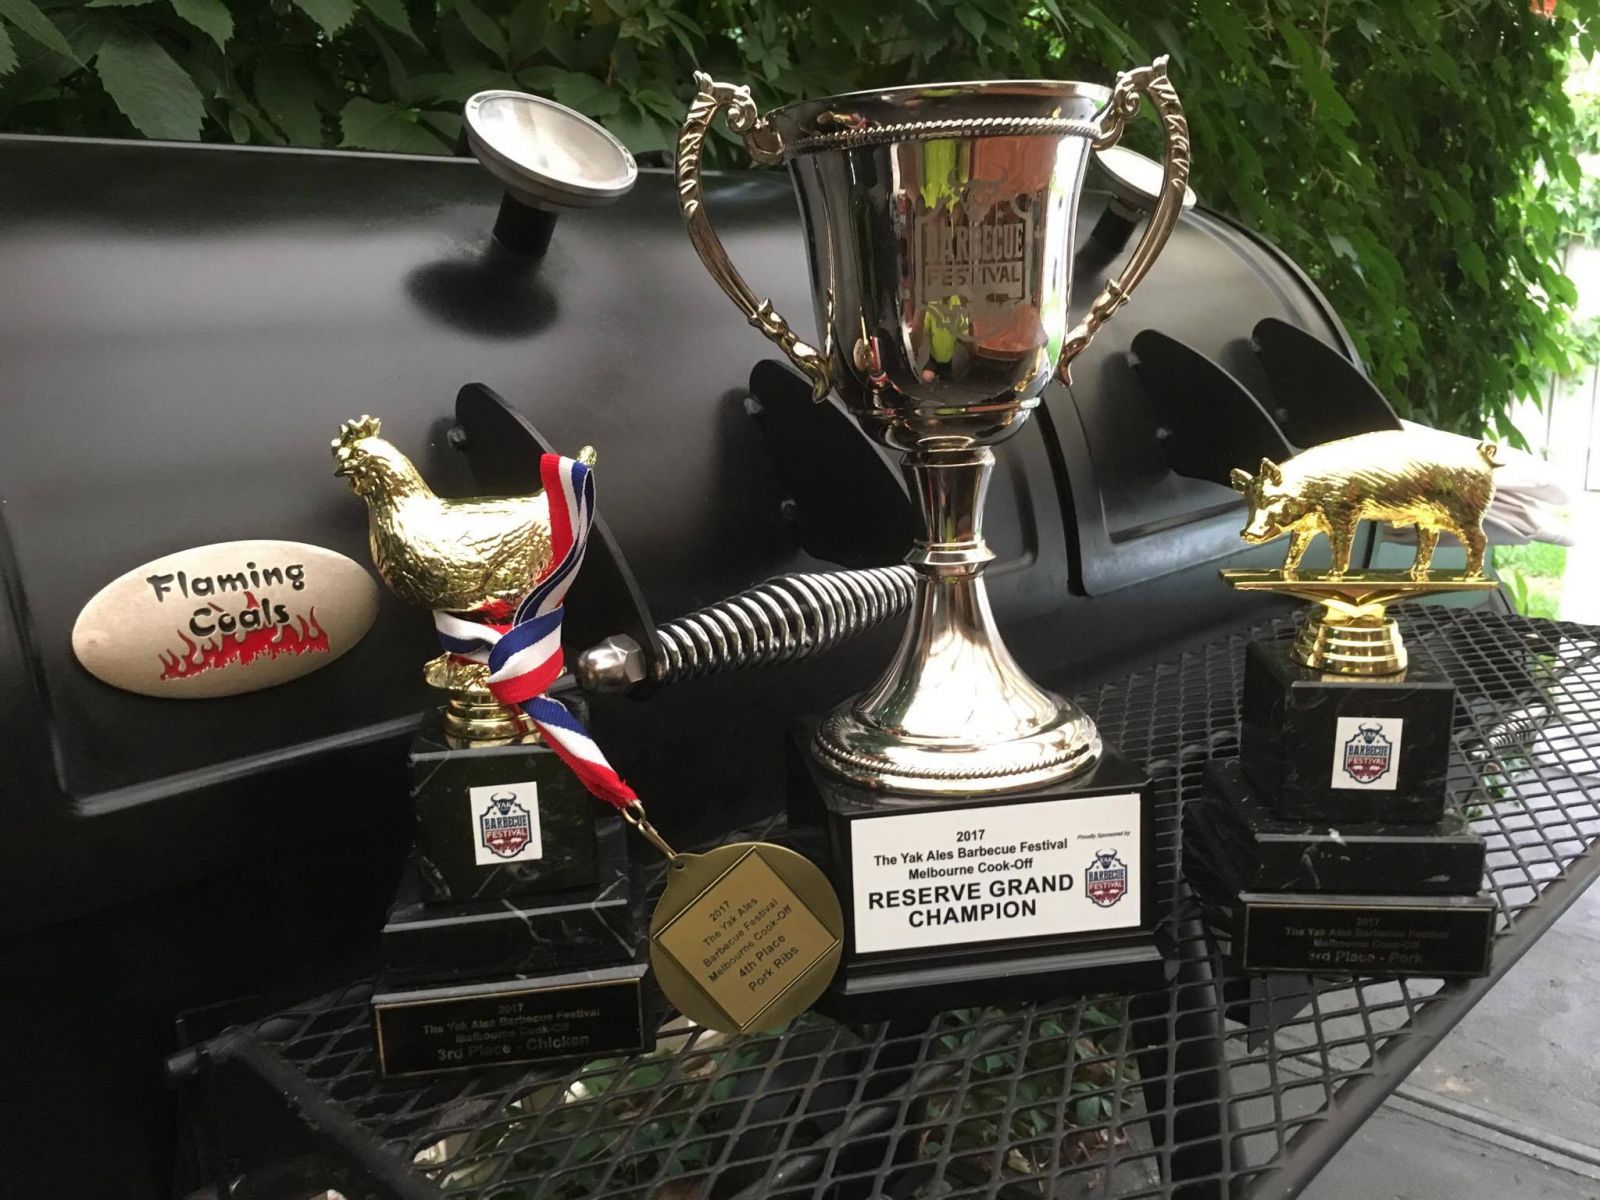 Picture showing some of the trophies won by competition teams using the flaming coals offset smoker in Australia